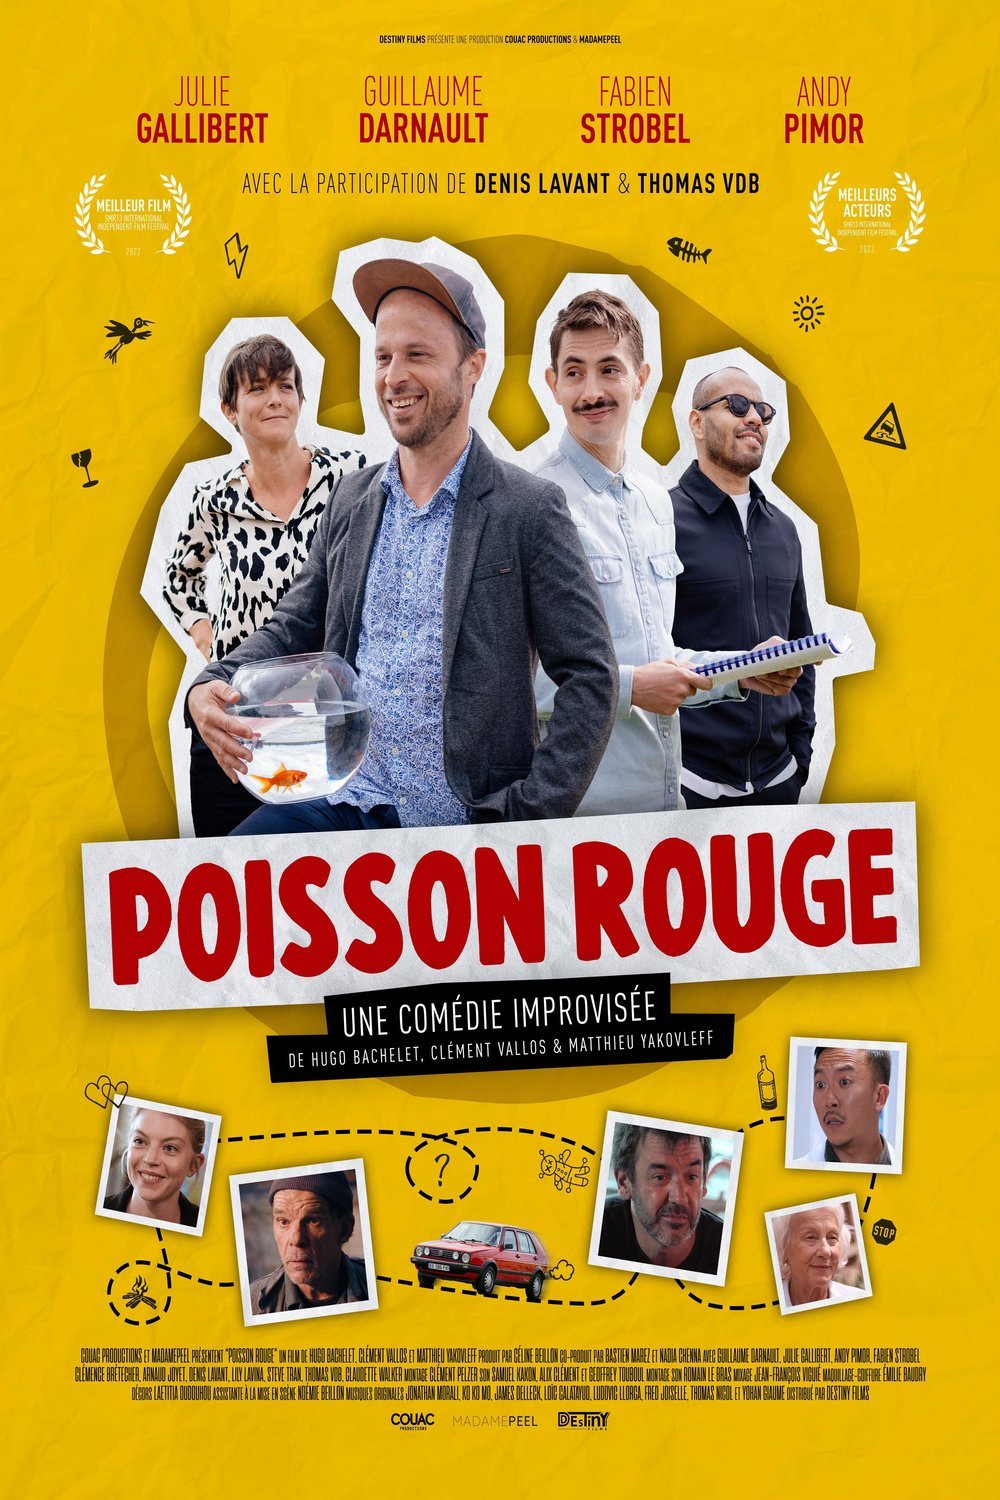 Poster of the movie Poisson rouge